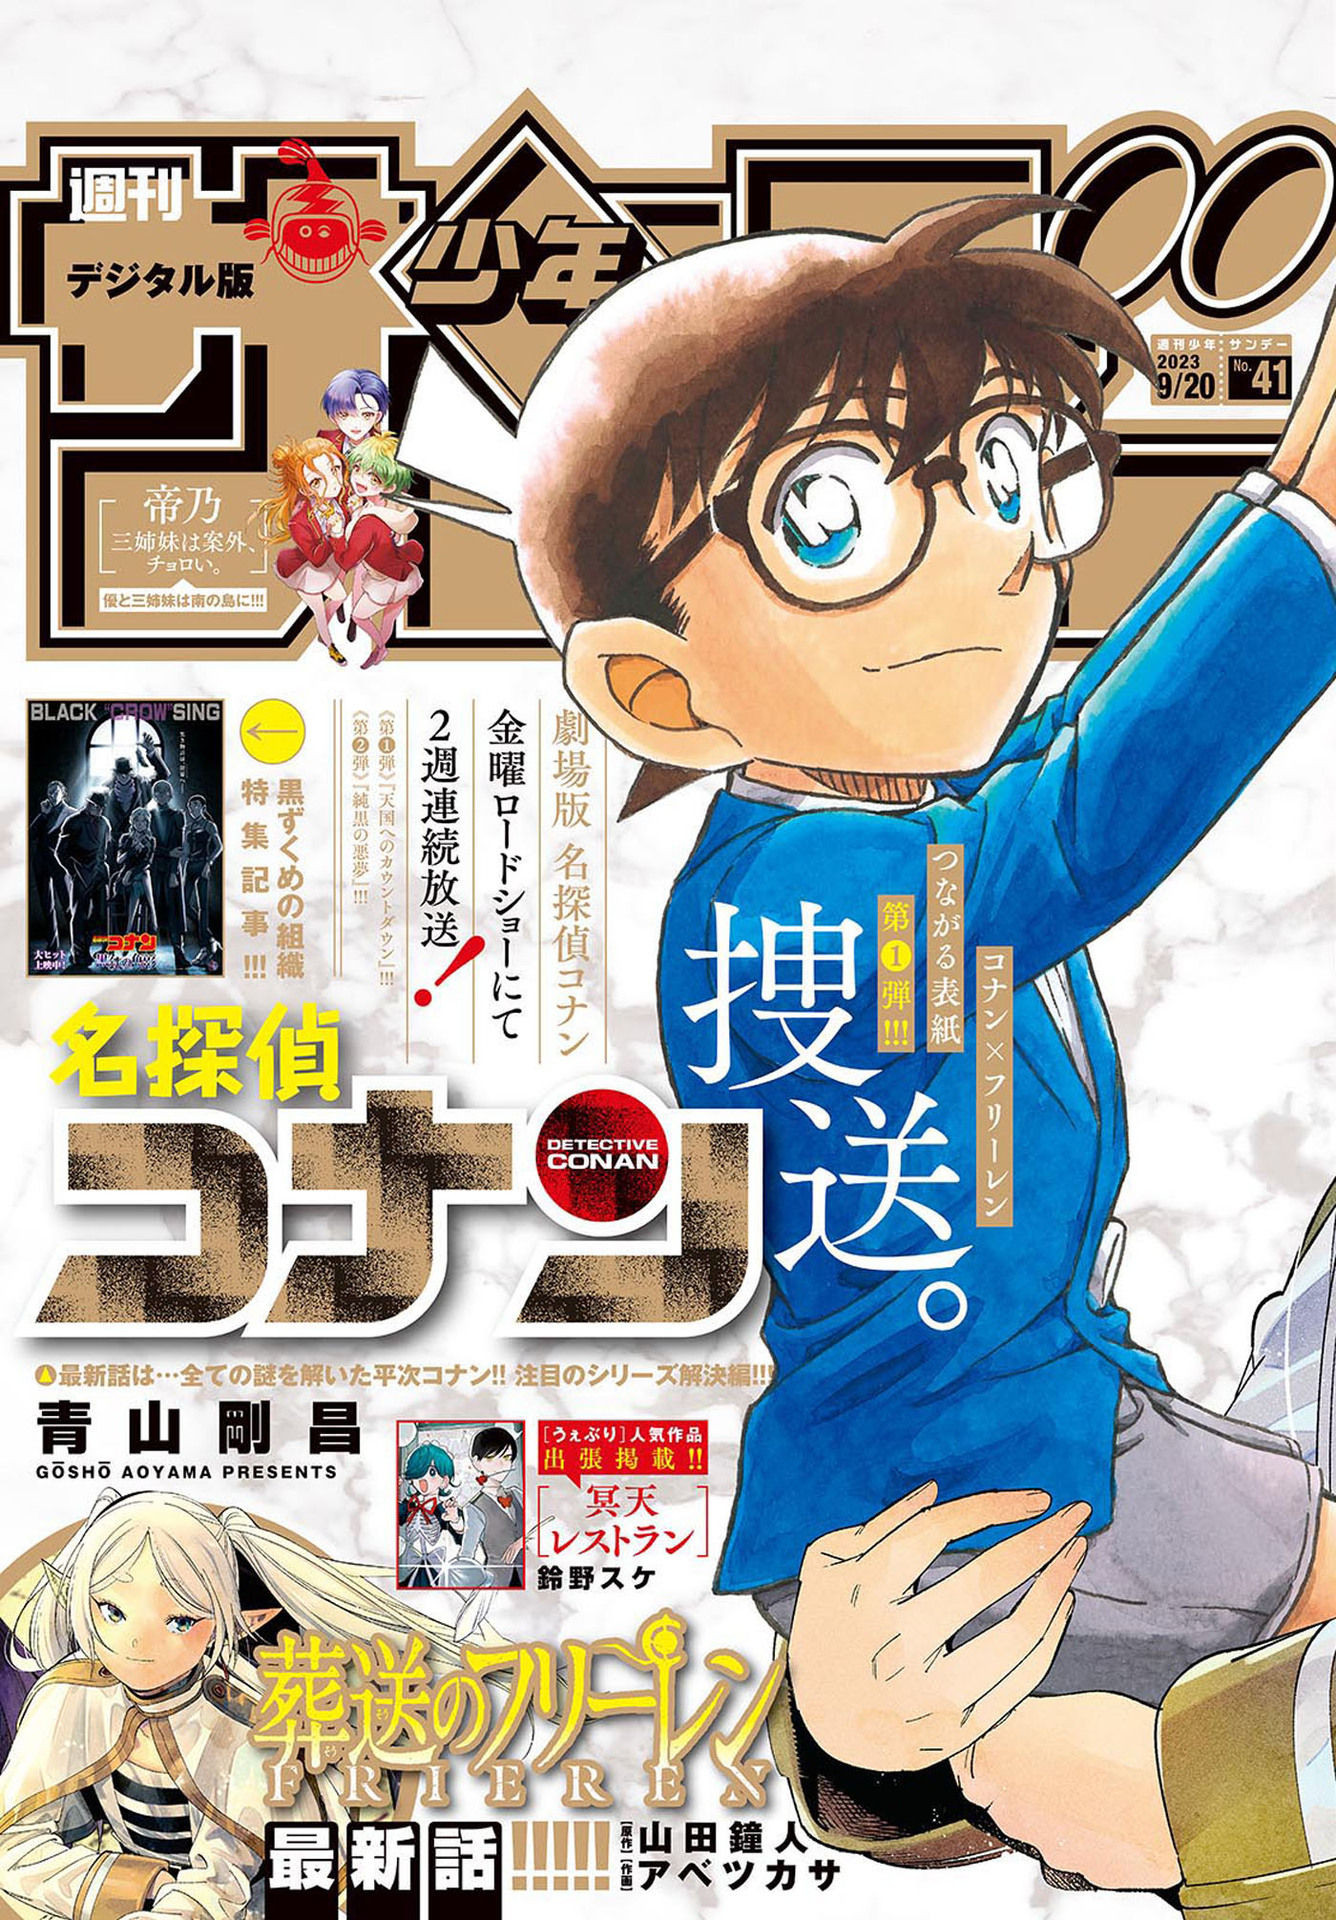 Detective Conan - Chapter 1118 - Page 1